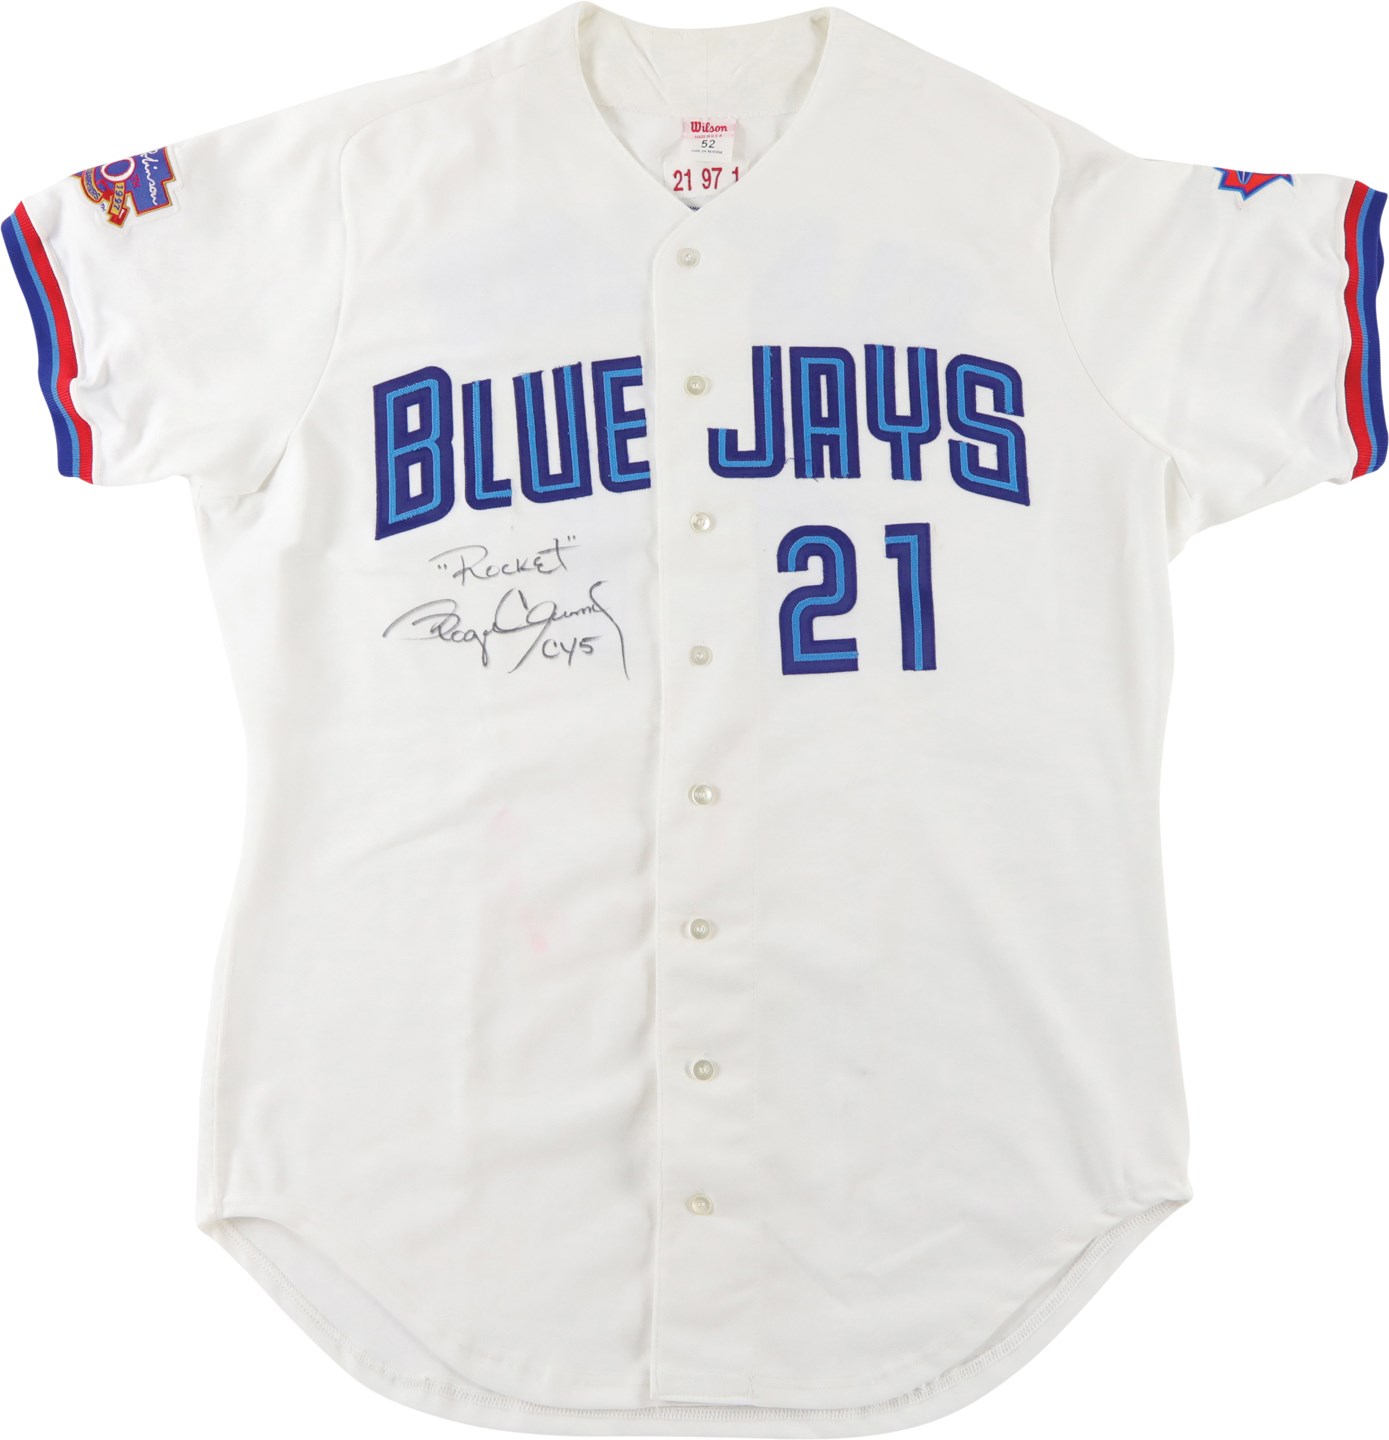 Baseball Equipment - 1997 Roger Clemens Toronto Blue Jays Signed Game Issued Jersey w/Jackie Robinson Patch